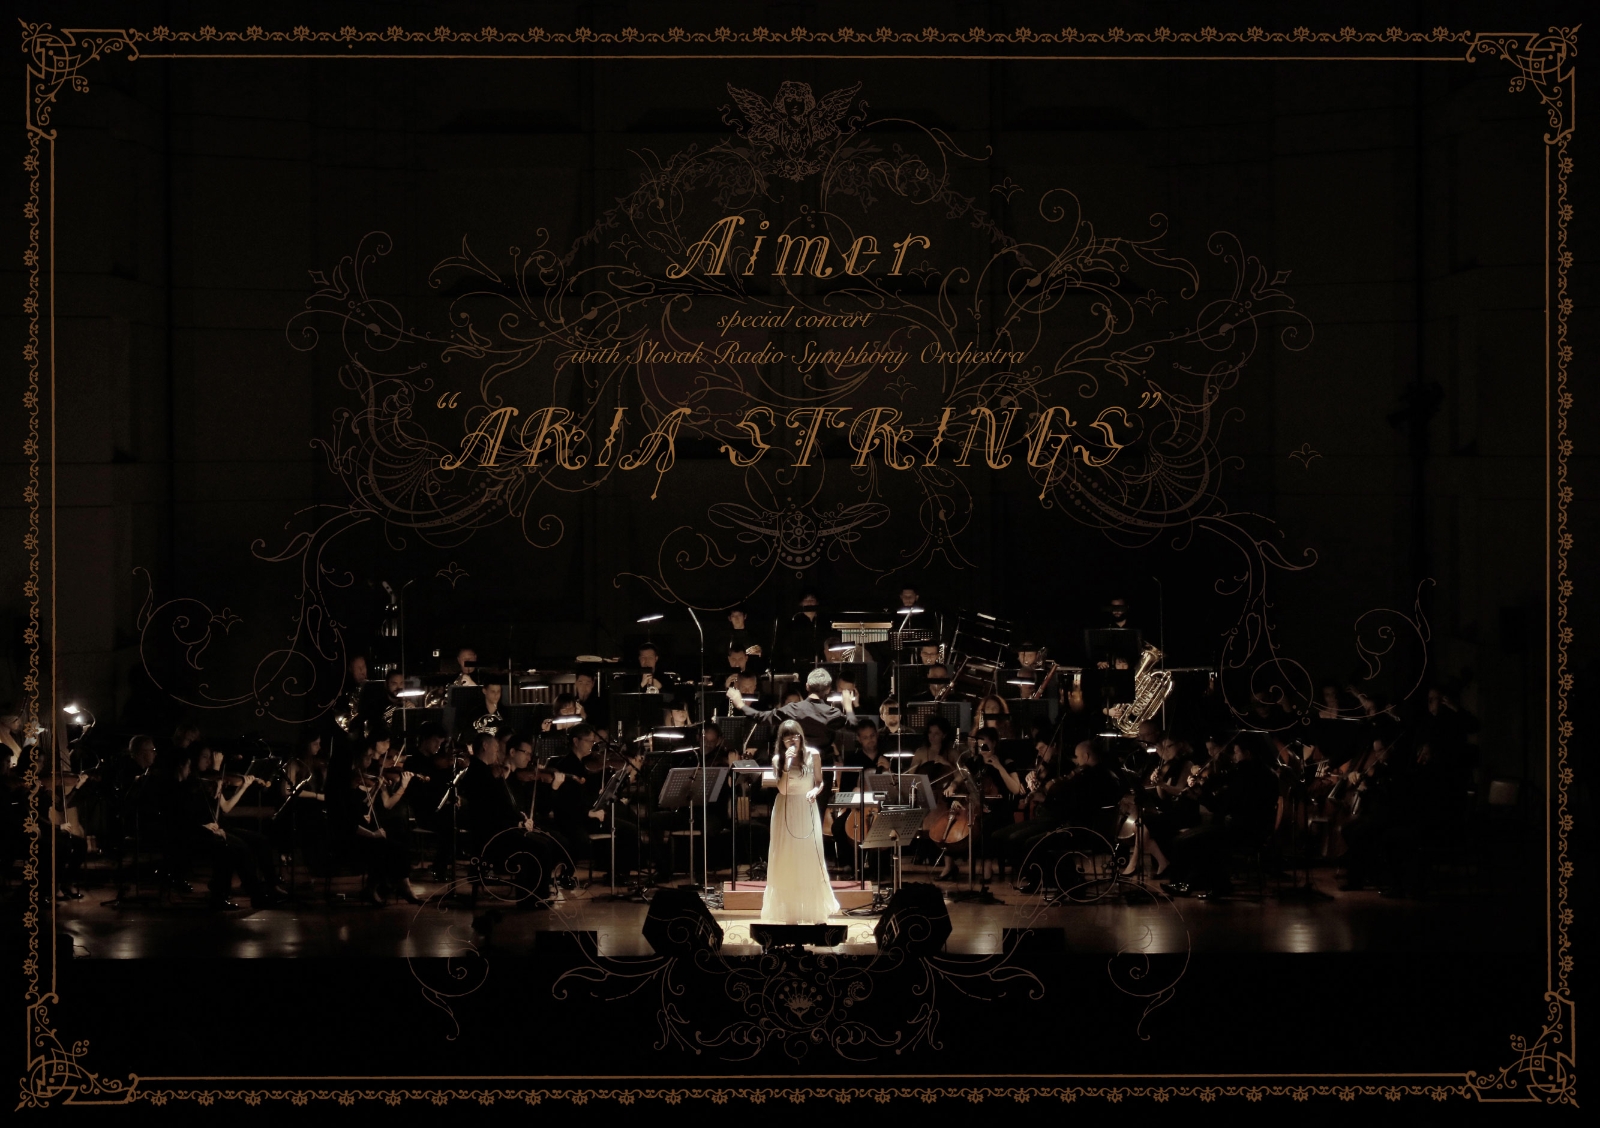 Aimer special concert with スロヴァキア国立放送交響楽団 “ARIA STRINGS”(初回生産限定盤)【Blu-ray】画像